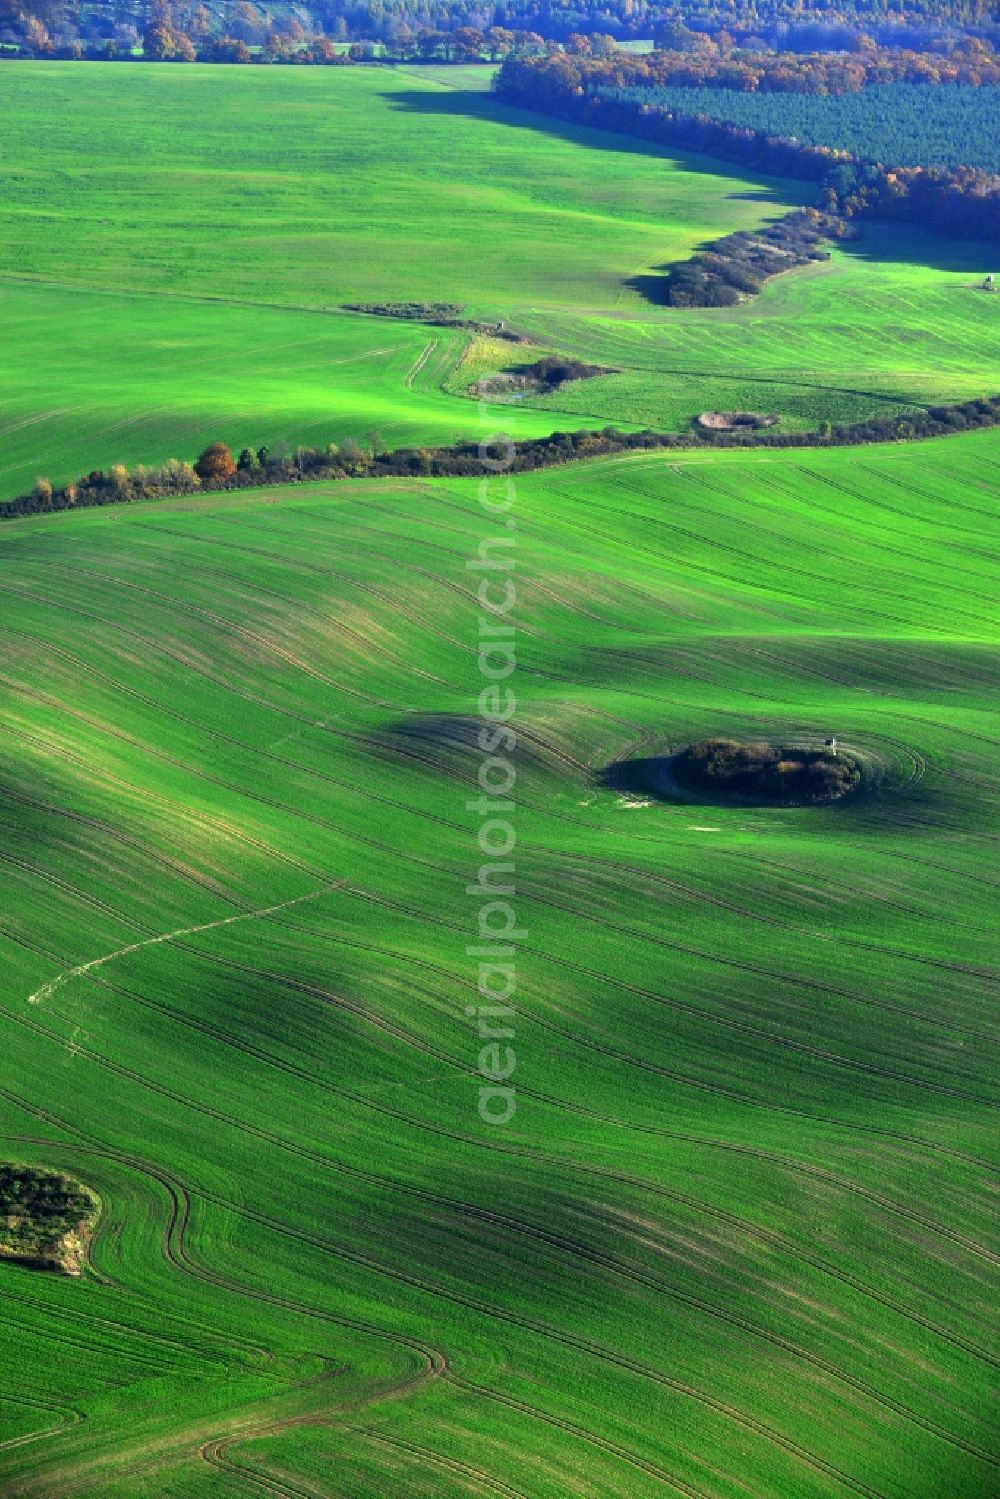 Aerial photograph Neubrandenburg - Autumnal landscape field with bumps and circular grassy plant locations in Neubrandenburg in the state of Mecklenburg-Western Pomerania